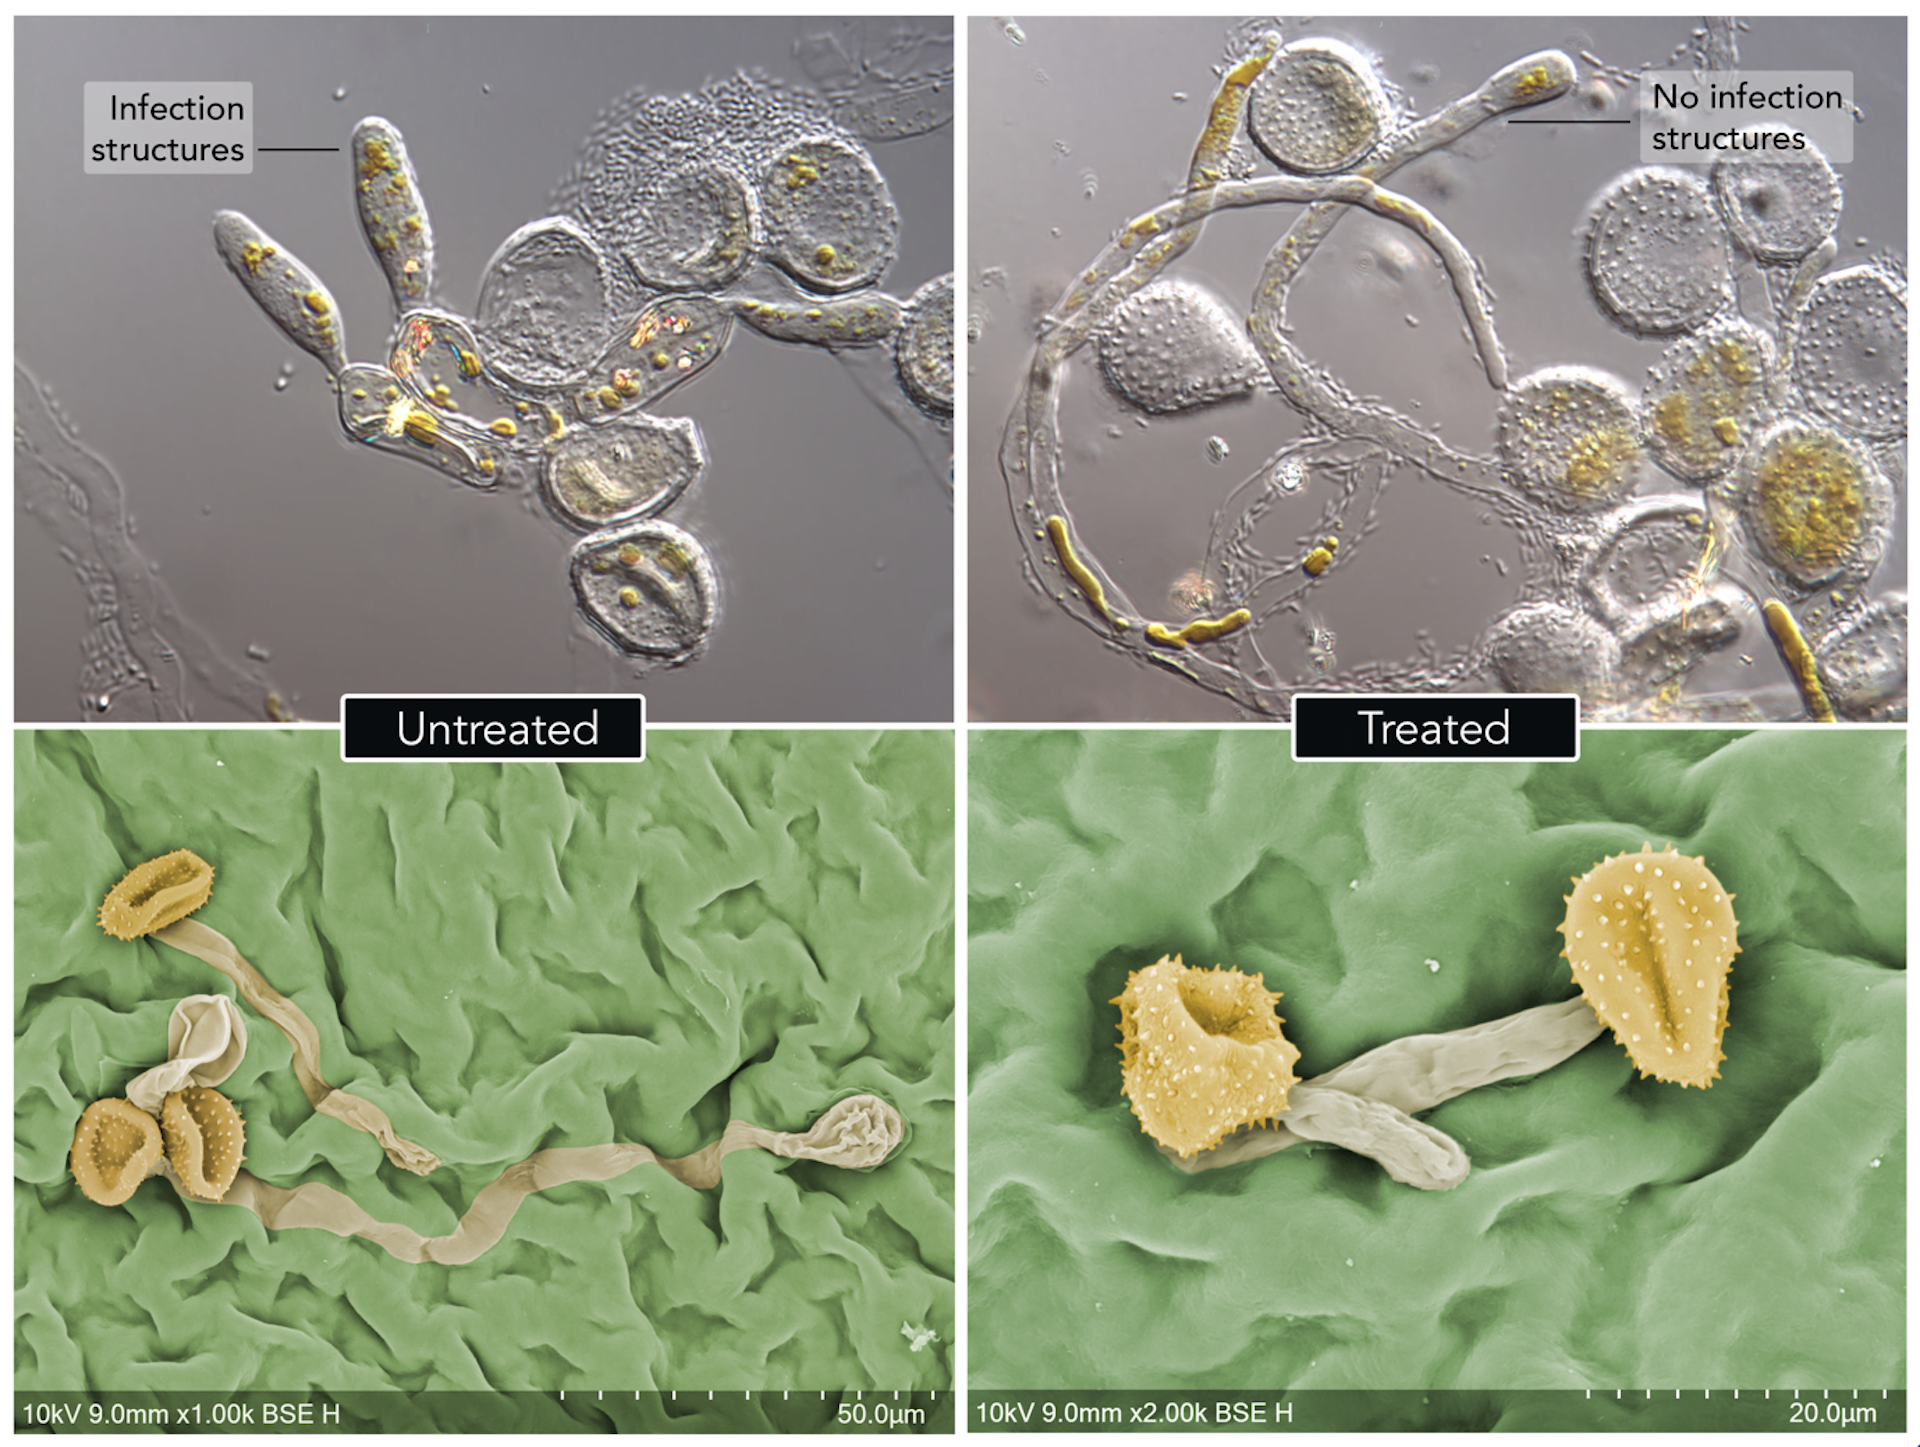 Microscope images showing myrtle rust spores on treated and untreated leaves.